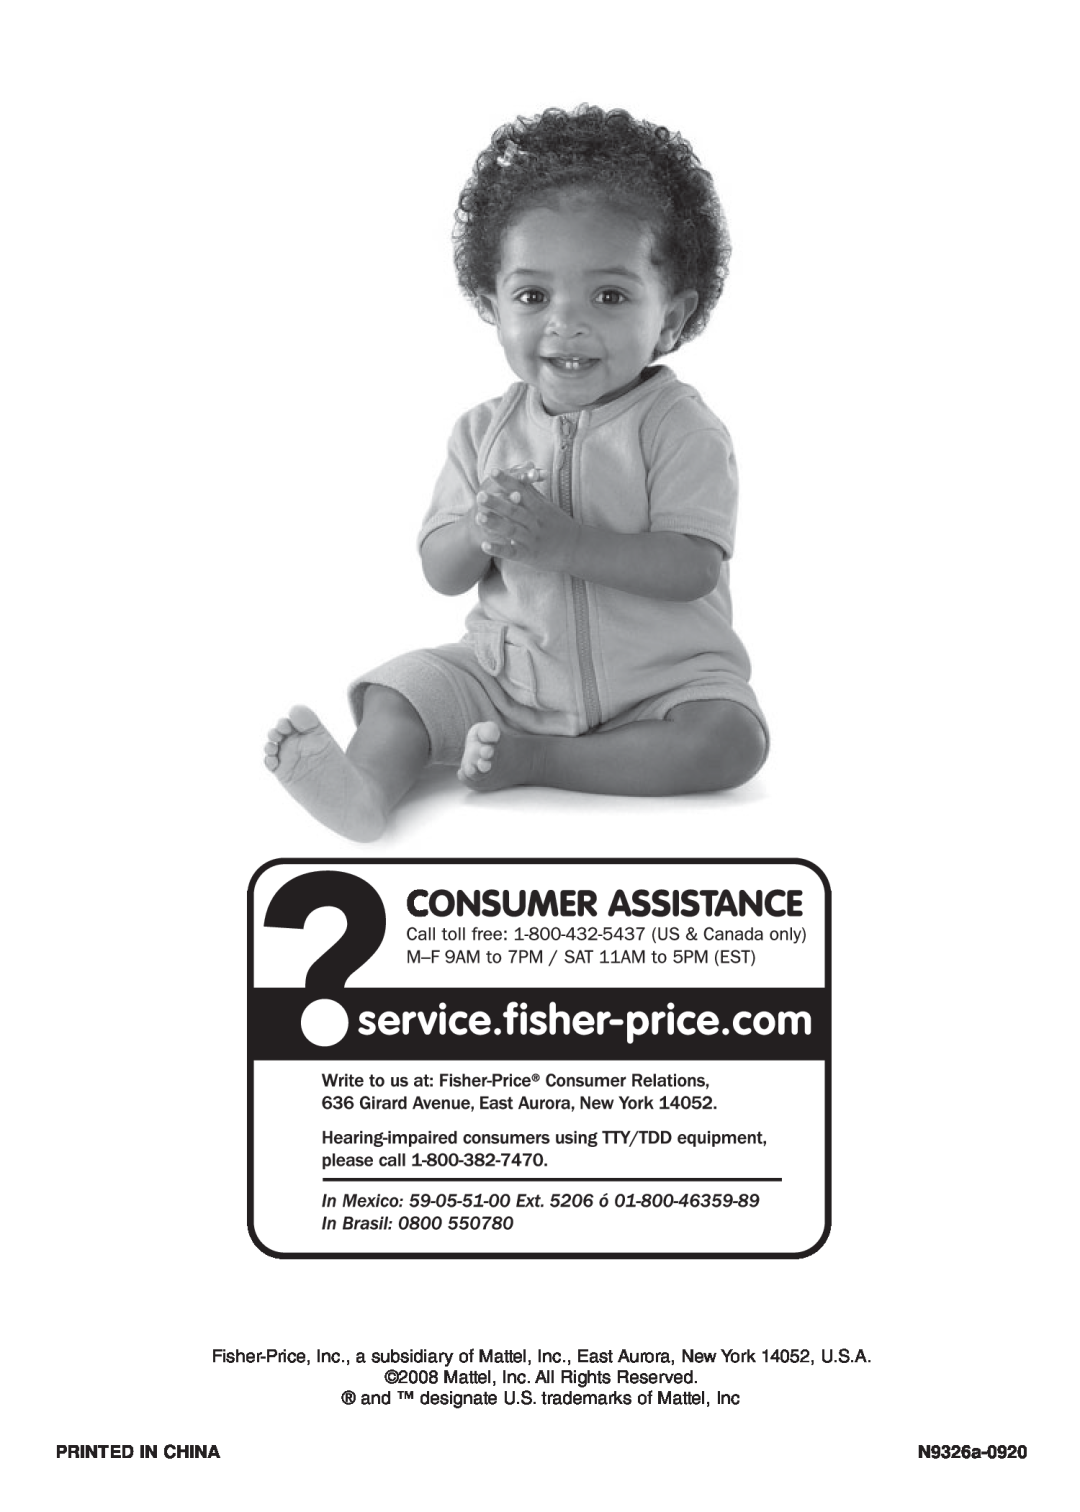 Fisher-Price manual Mattel, Inc. All Rights Reserved, and designate U.S. trademarks of Mattel, Inc, N9326a-0920 